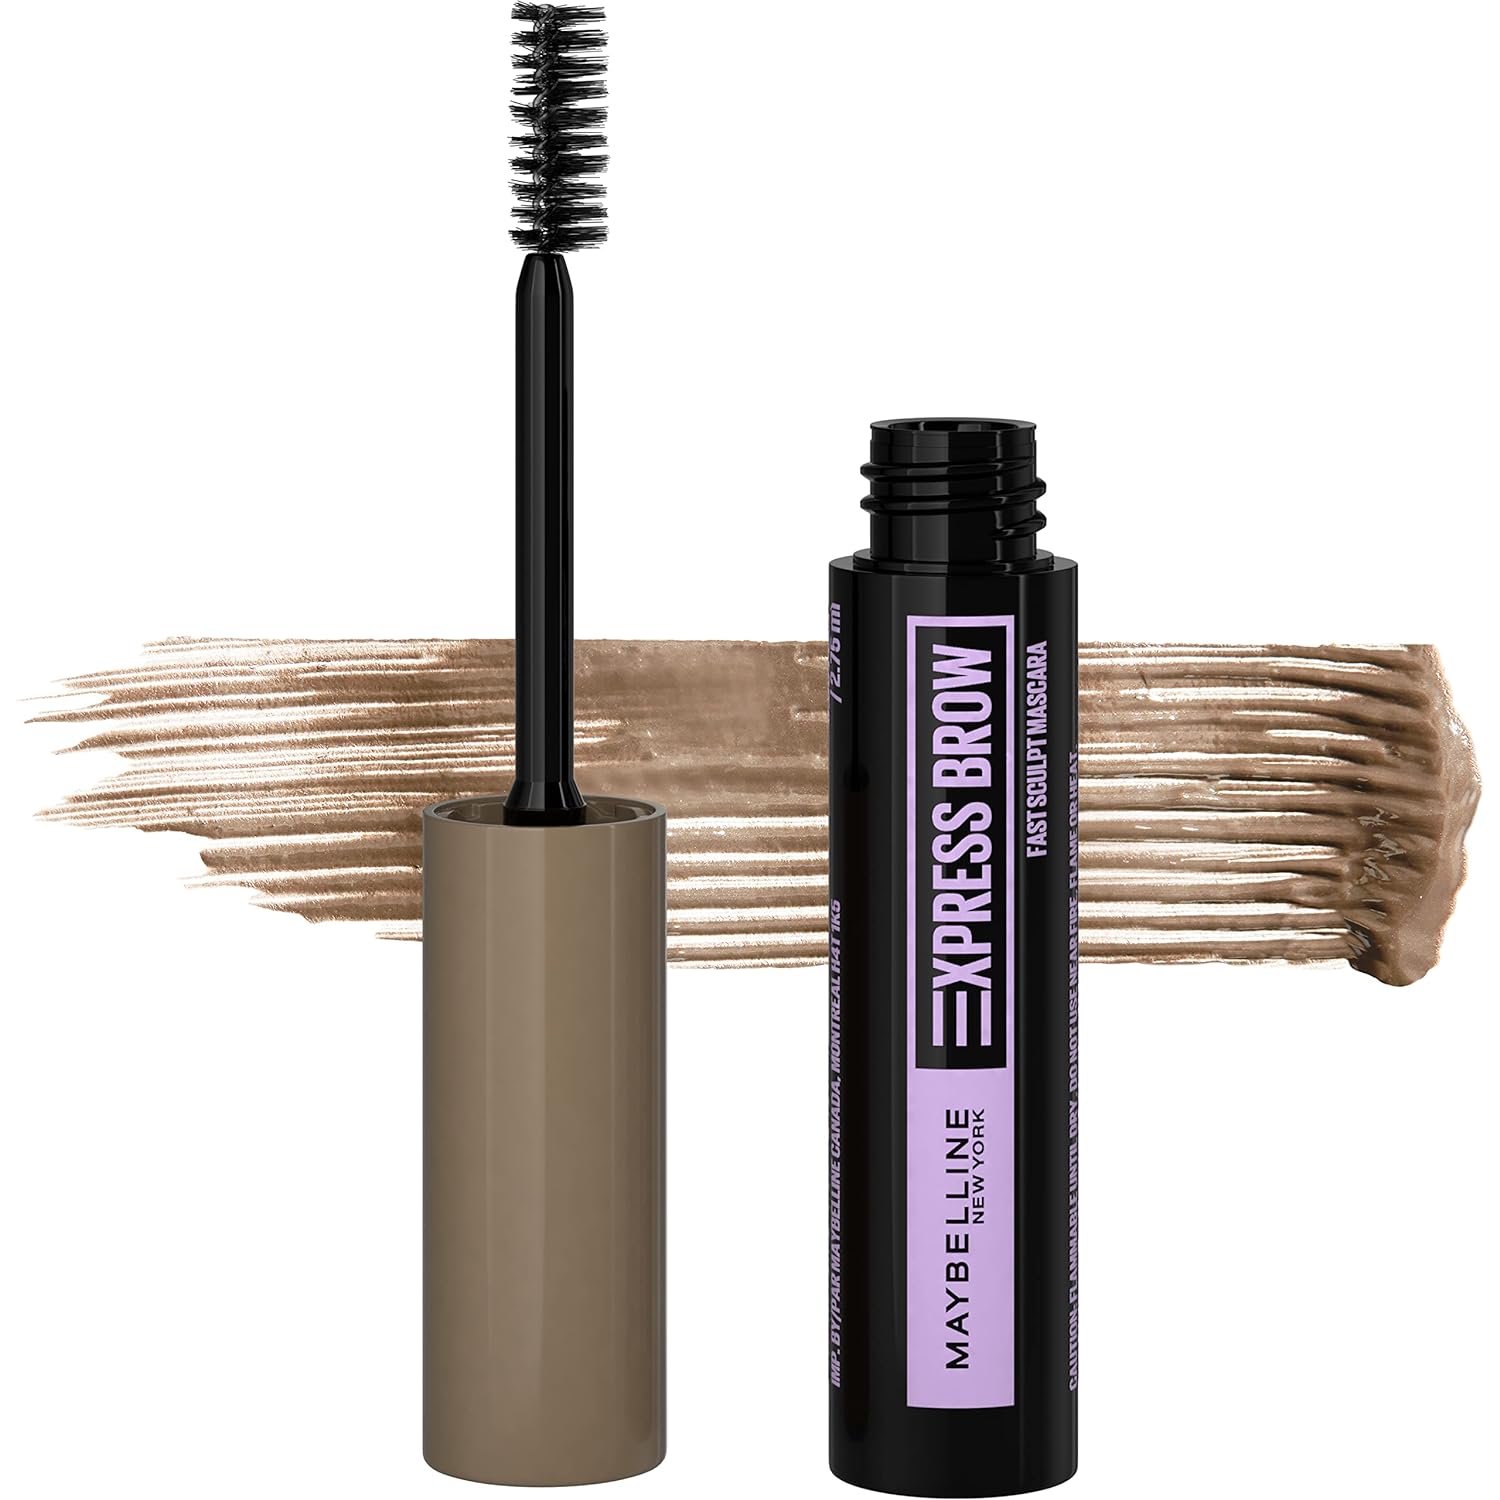 Maybelline Brow Fast Sculpt, Shapes Eyebrows, Eyebrow Mascara Makeup, Light Blonde, 0.09 .